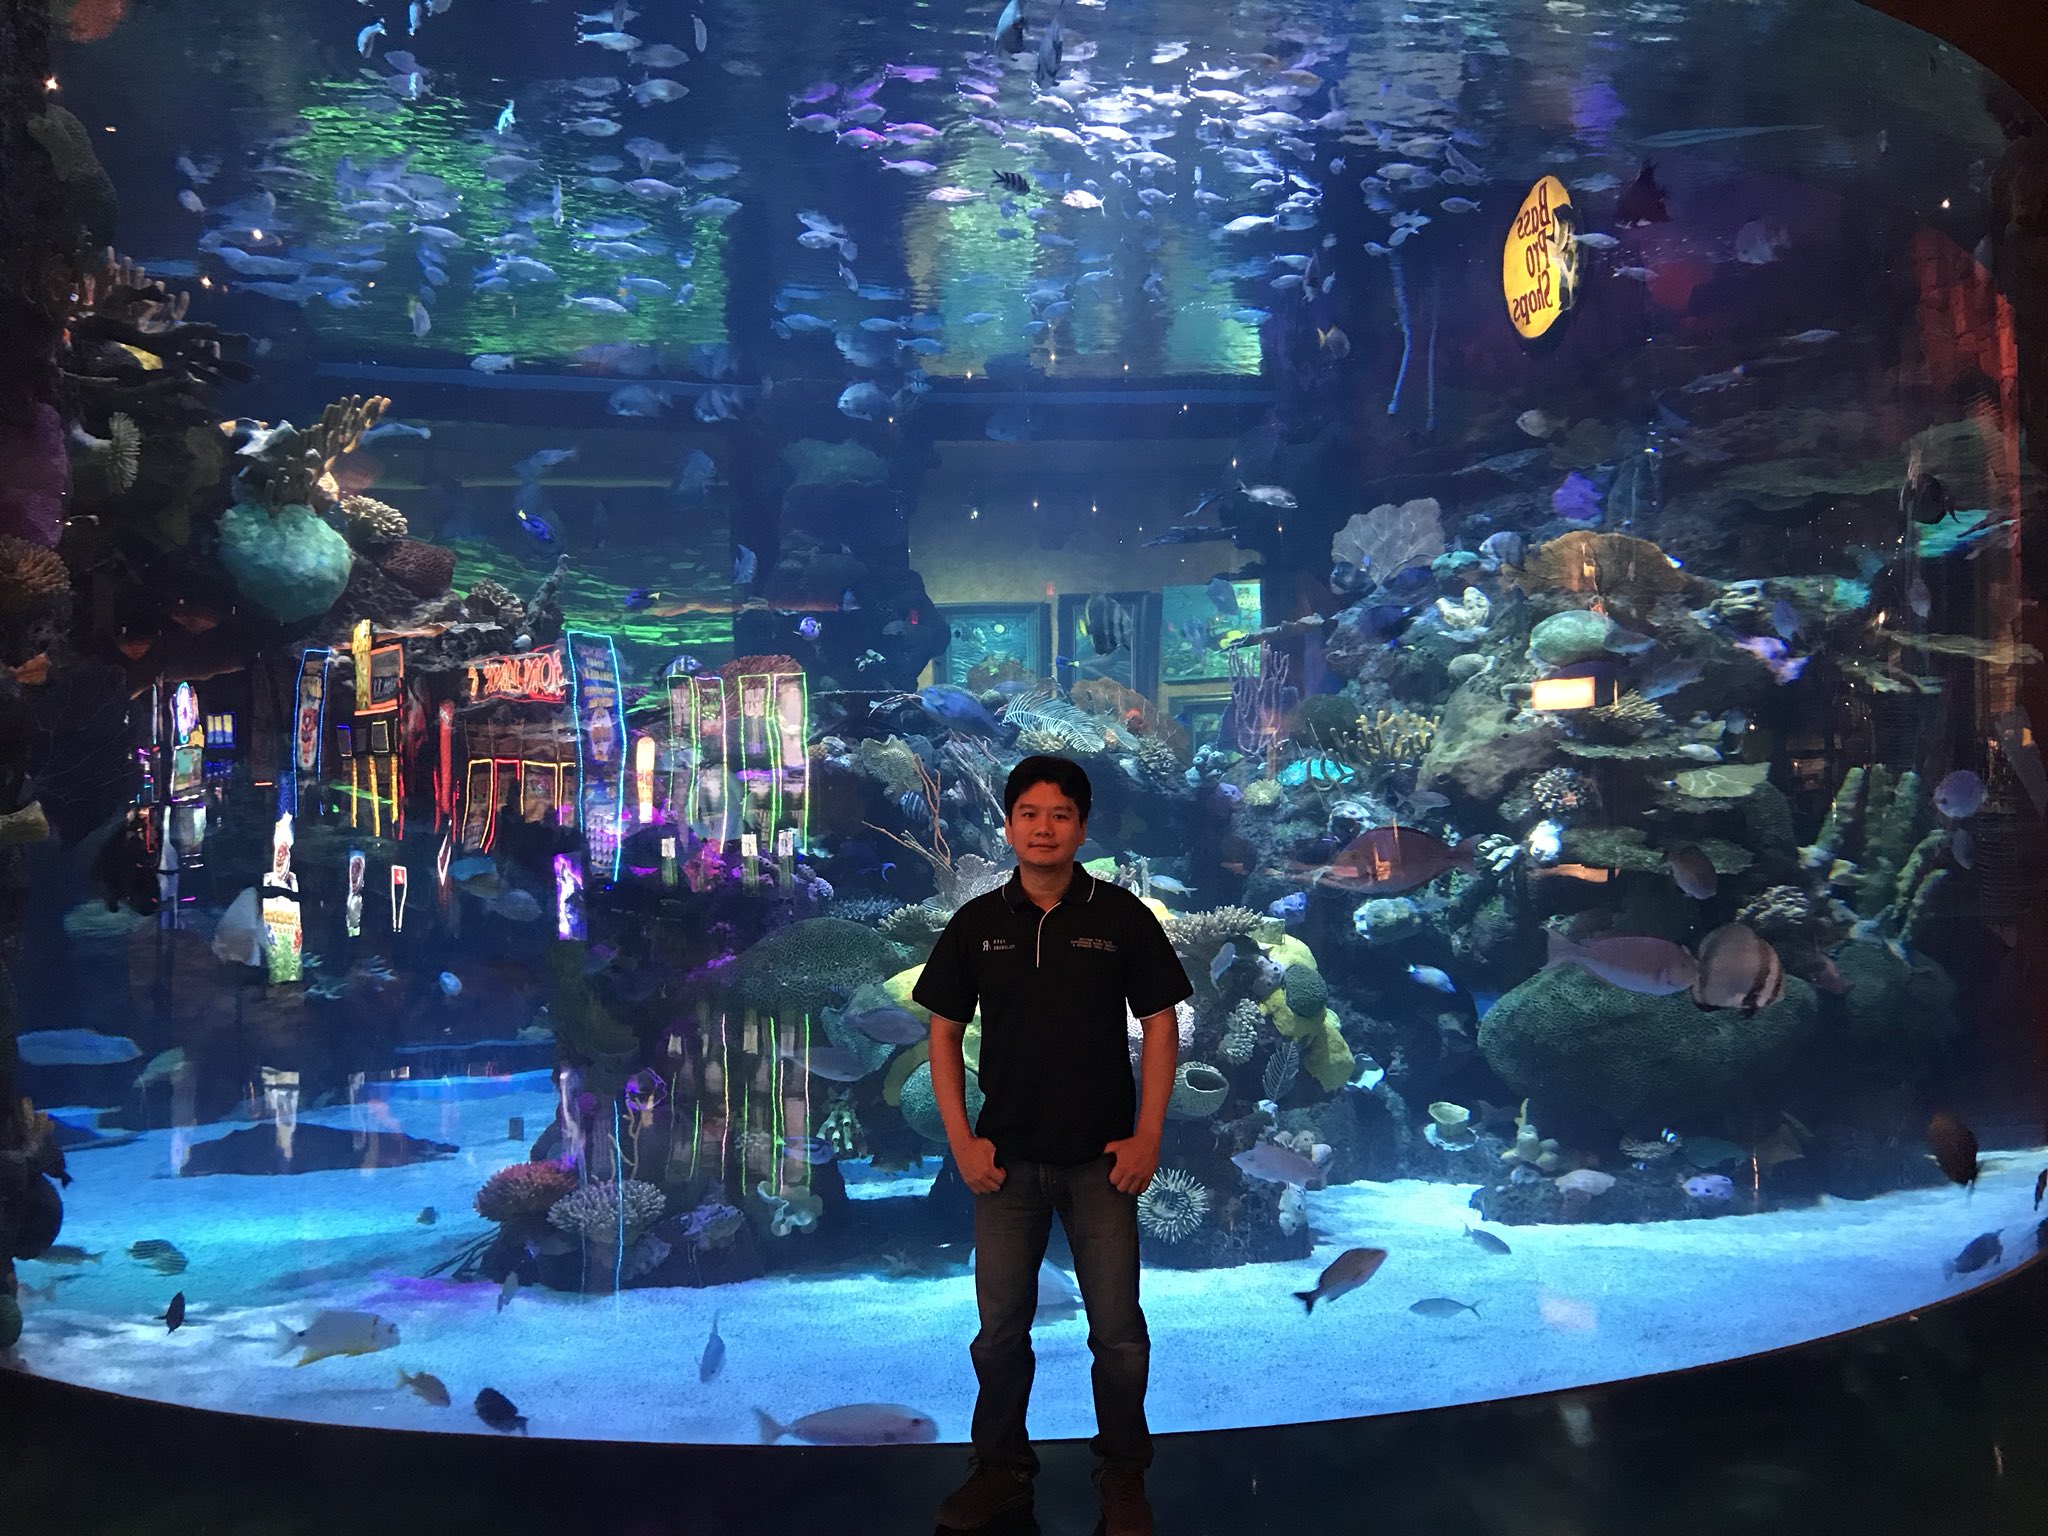 Gárgaras lineal miel Reef Anabolics on Twitter: "This system is absolutely amazing! If you're  ever in Las Vegas, check out the Silverton Casino which is home to this  outstanding 117,000-gallon reef aquarium! #macna2018 #lasvegas #coral #